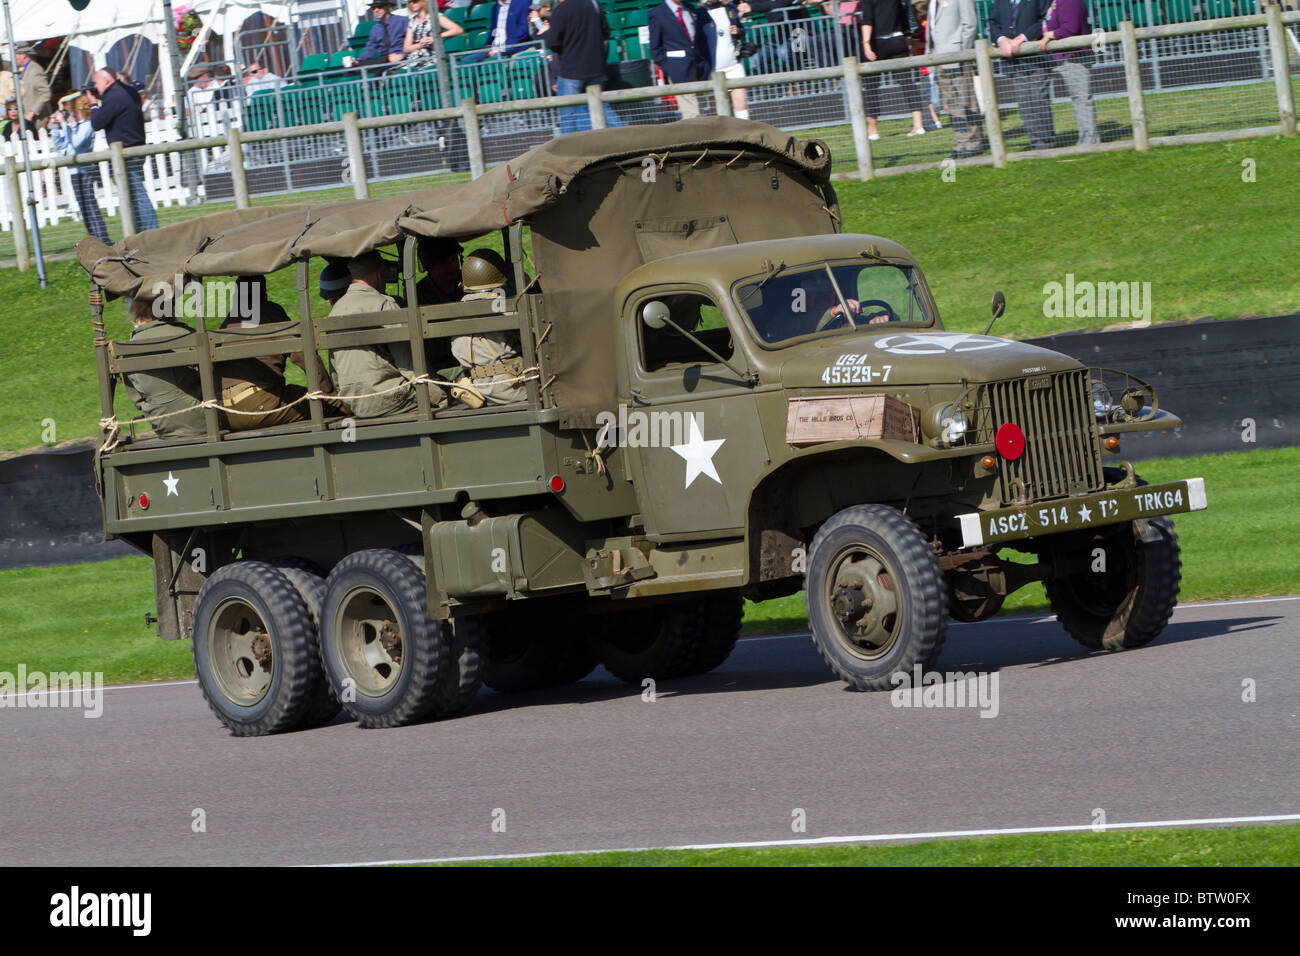 1940's GMC military troop transporter on display at the 2010 Goodwood Revival, Sussex, England, UK. Stock Photo